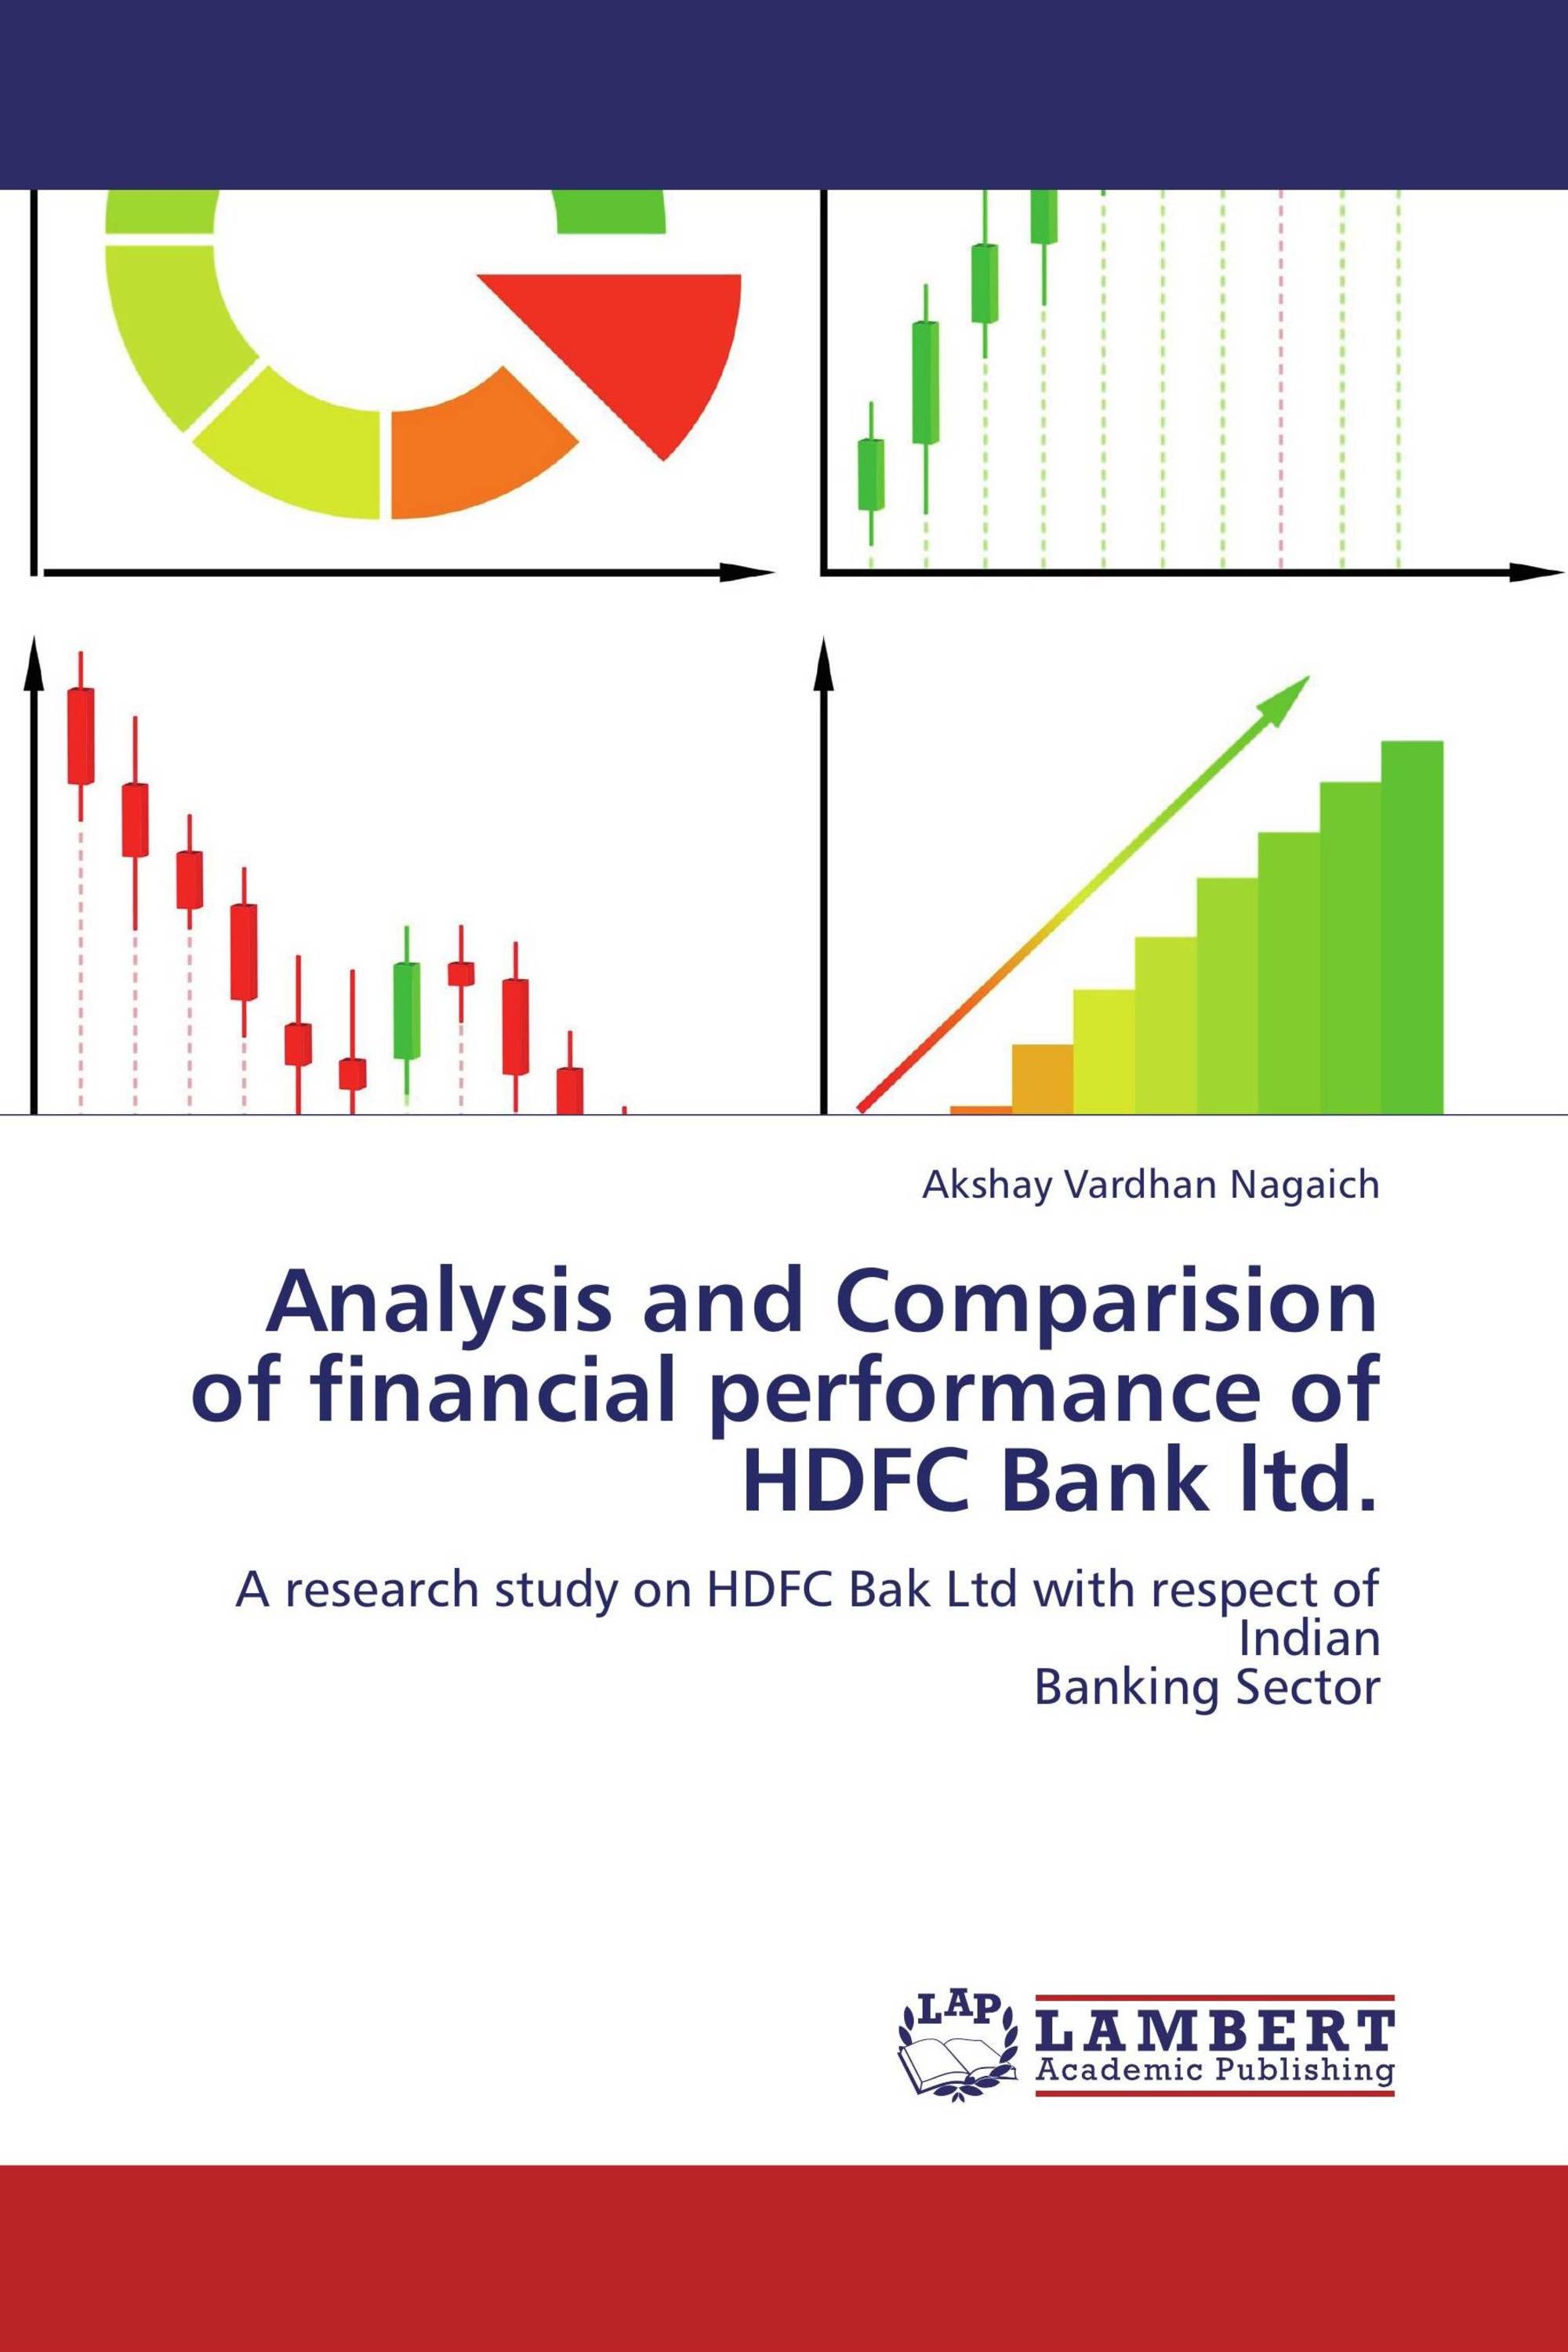 literature review on financial analysis of company